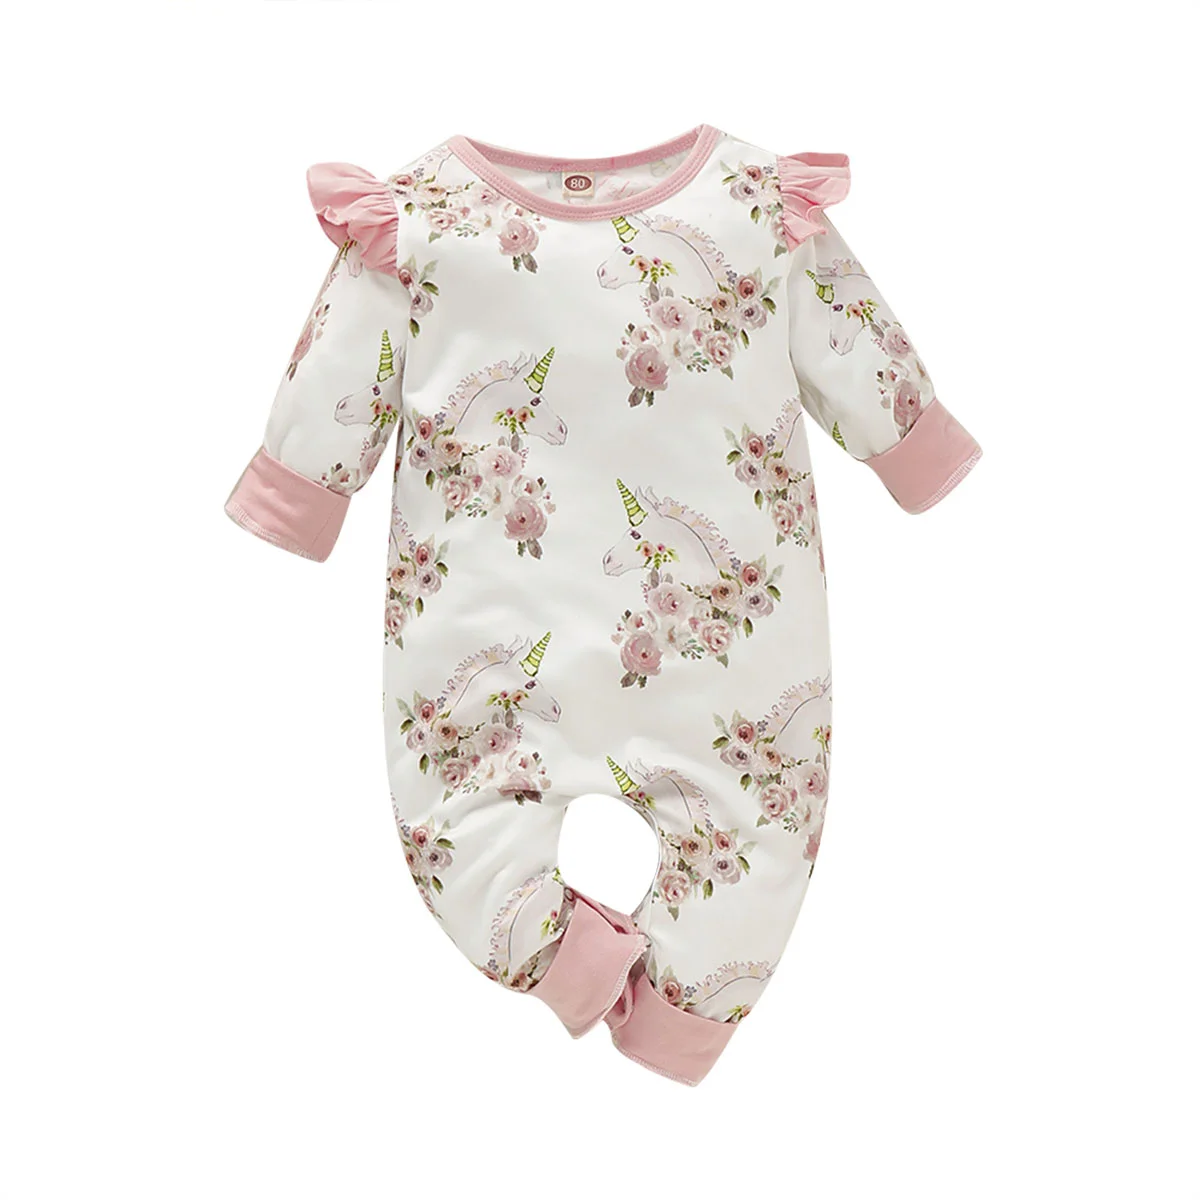 Baby Bodysuits made from viscose  Princess Little Girl Romper Jumpsuit Pink Long Sleeve Romper Jumpsuit Infants Baby Girl Playsuit Outfits Newborn Baby Clothes Newborn Knitting Romper Hooded 